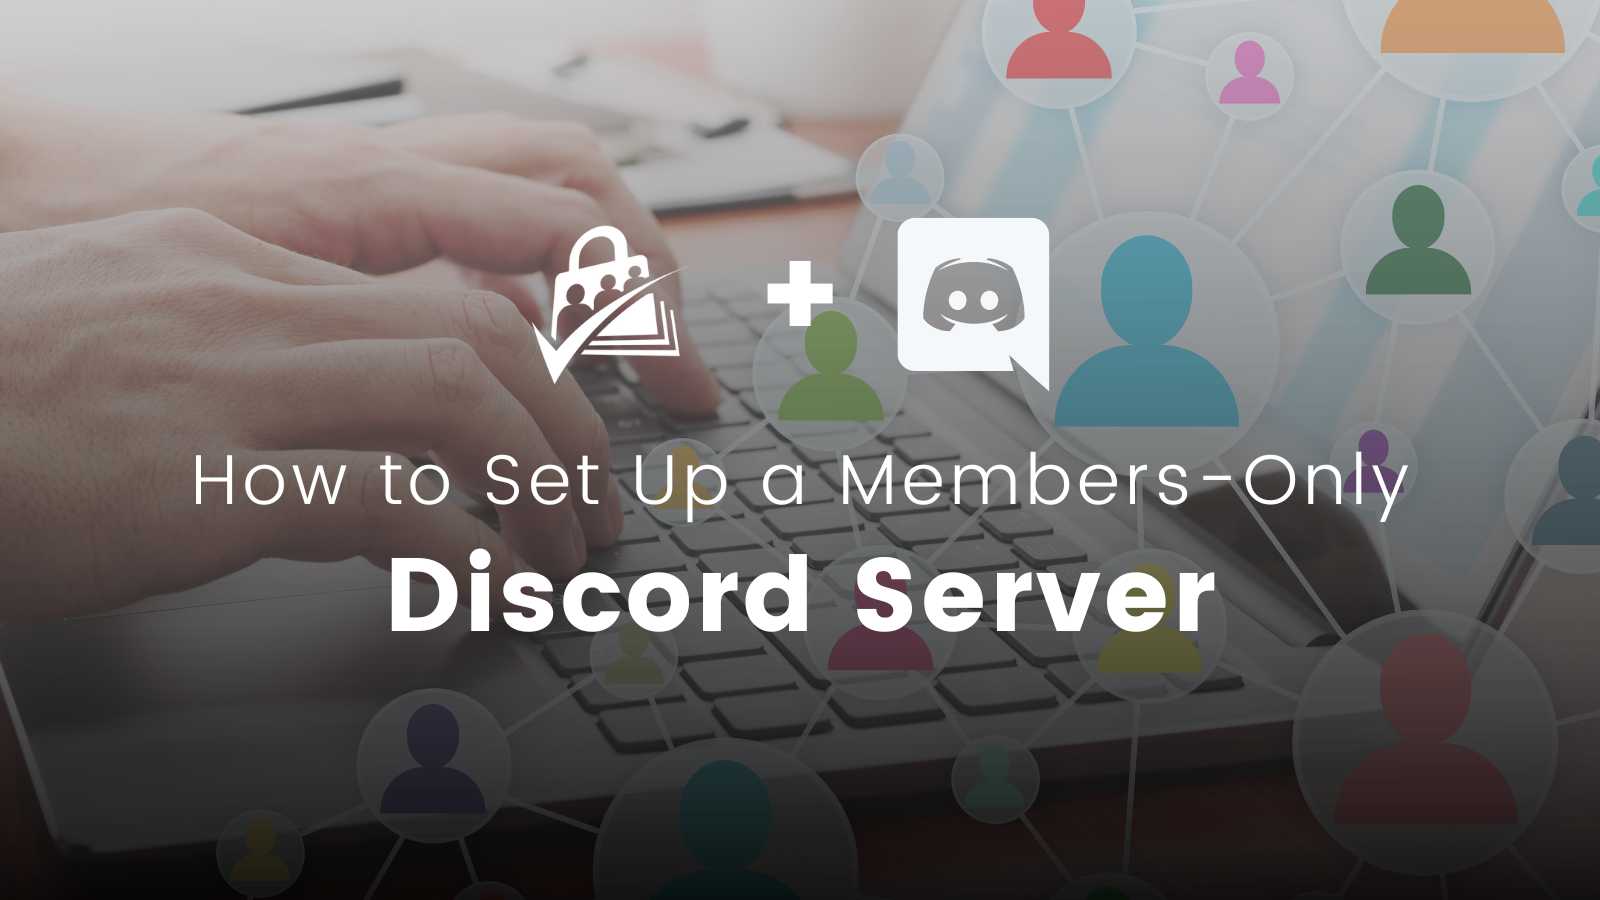 Build a website like a discord for Grupo Chat - Chat Room